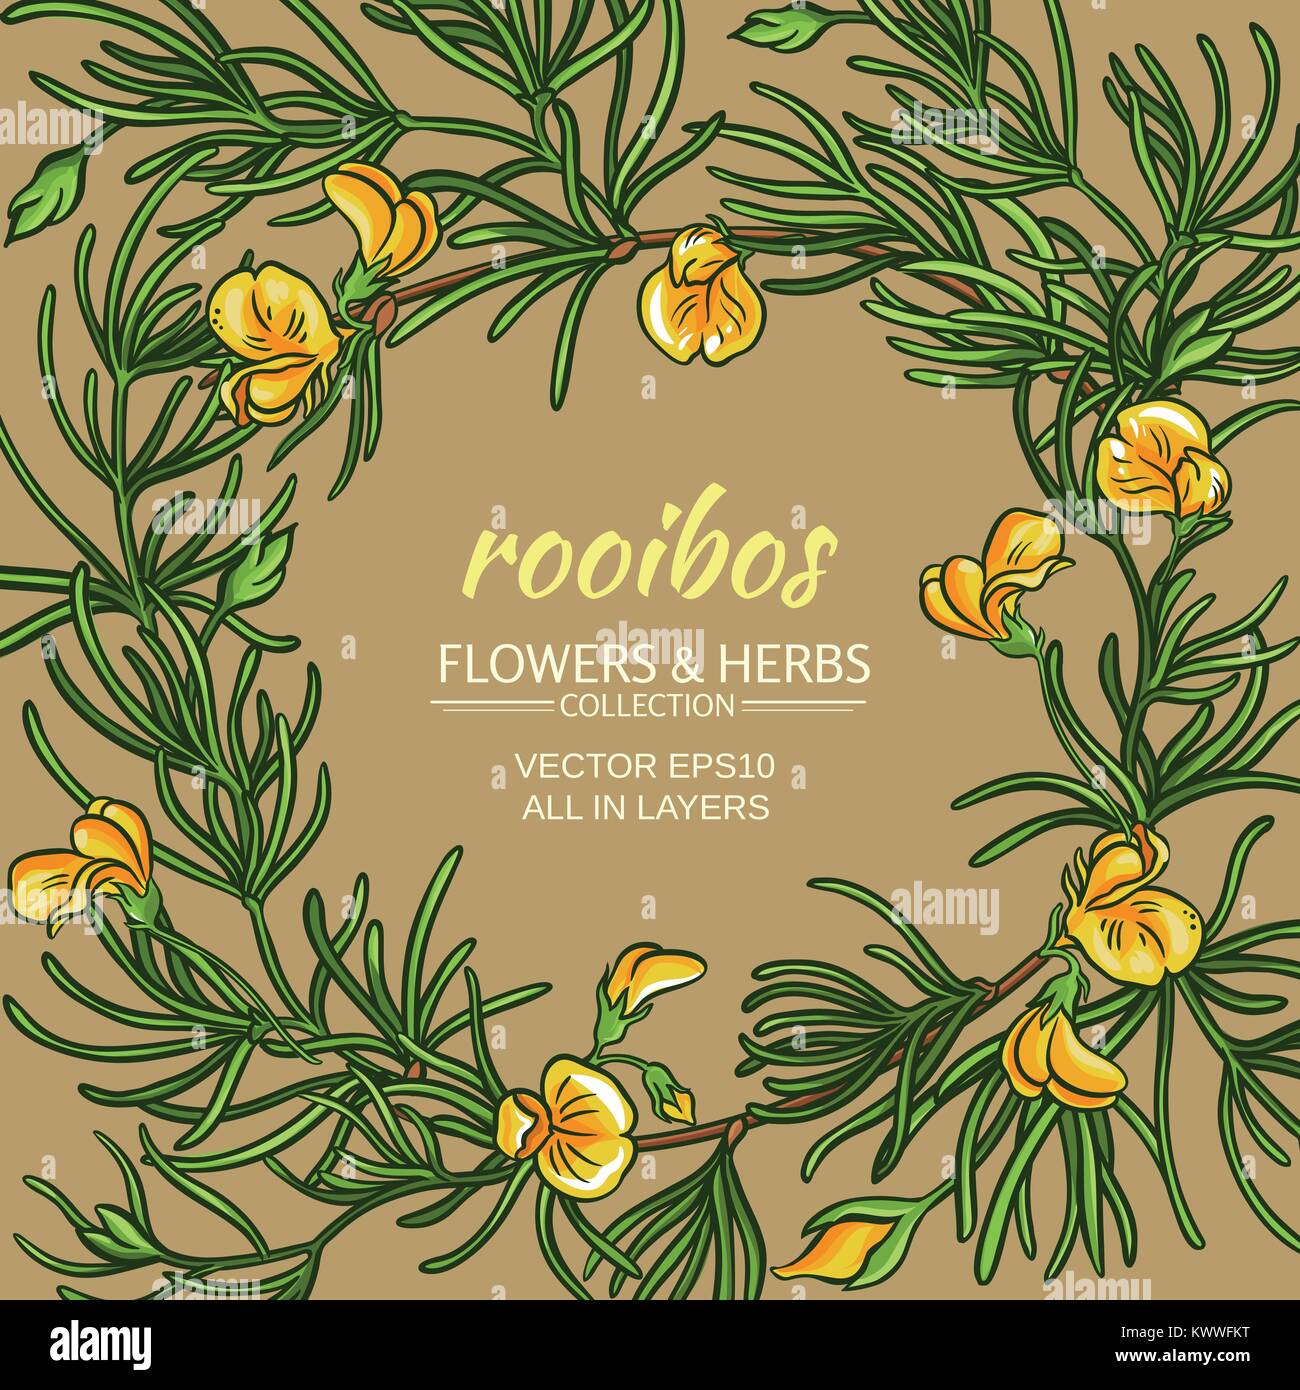 rooibos plant vector frame on color background Stock Vector